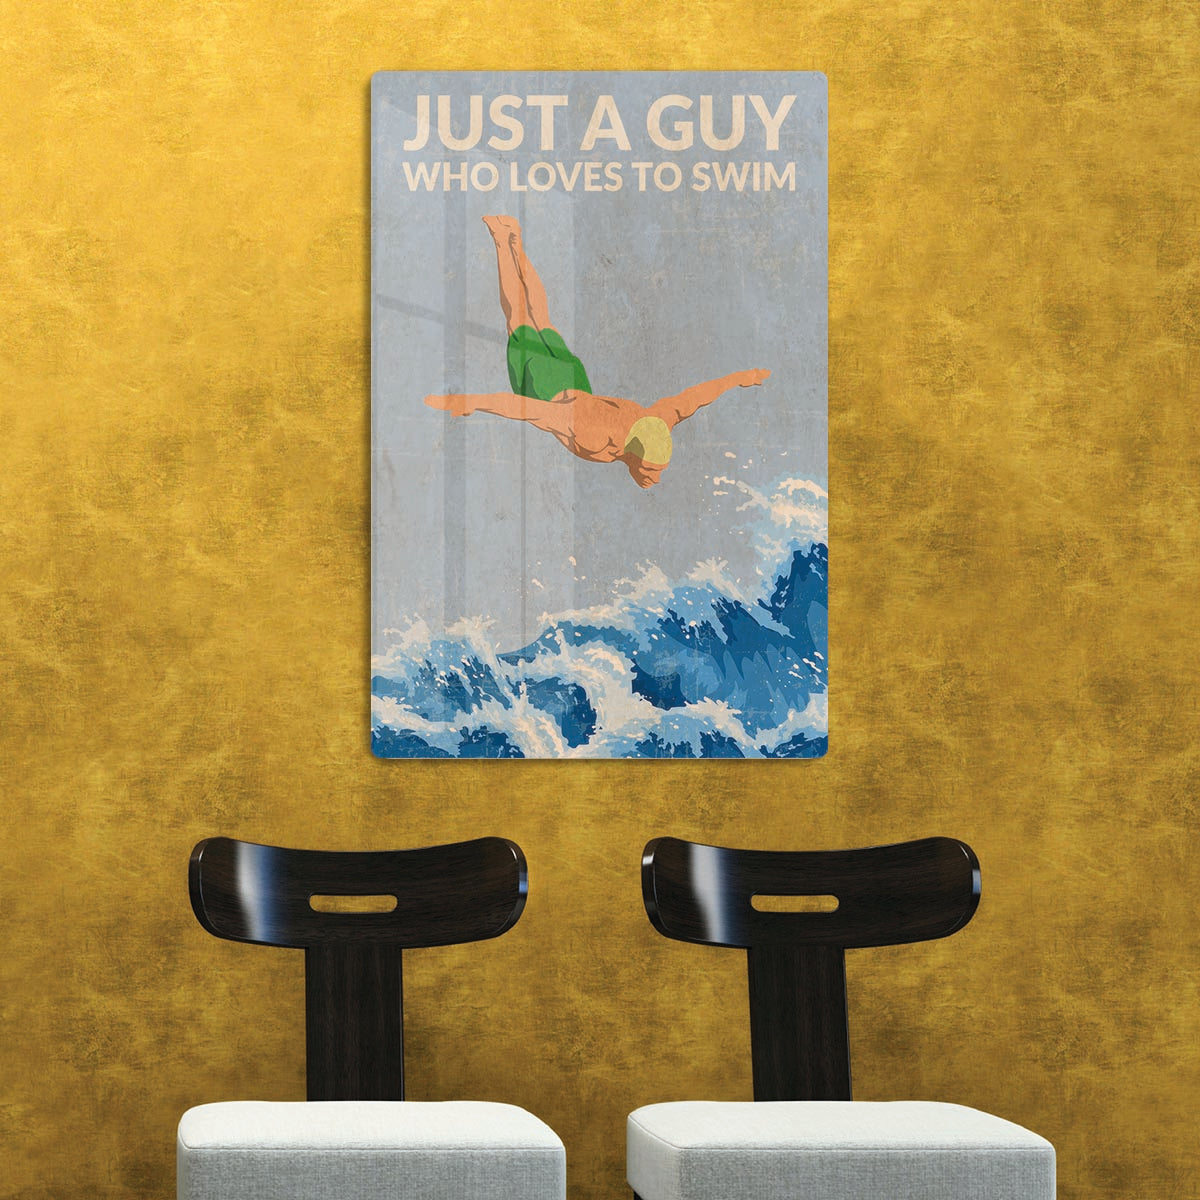 Just a Guy Who Loves To Swim green Acrylic Block - 1x - 2